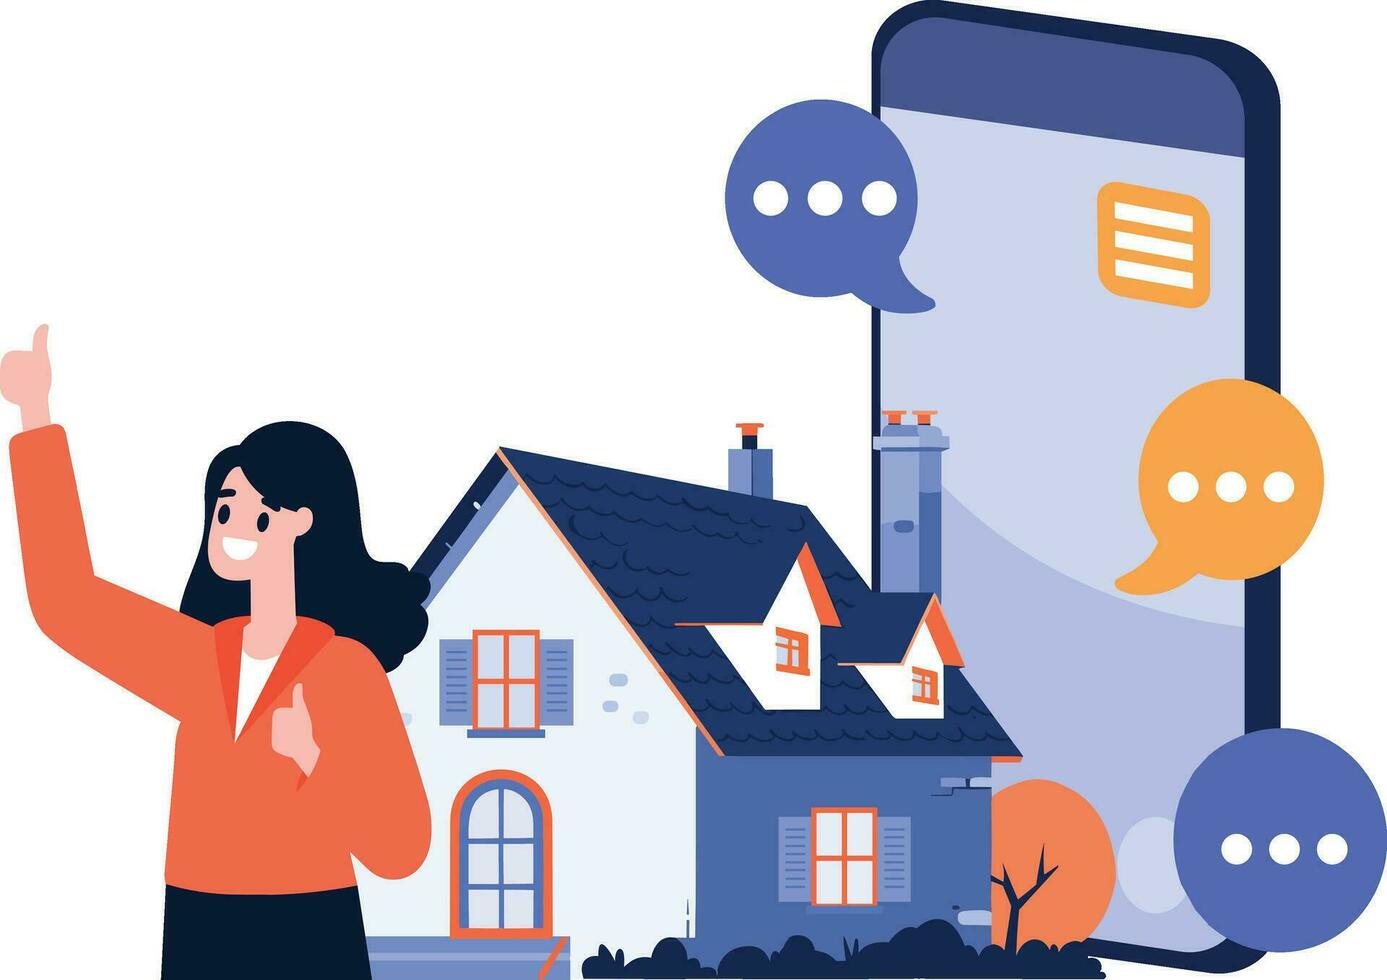 Hand Drawn House broker character with smartphone In Concept Real Estate Online in flat style vector